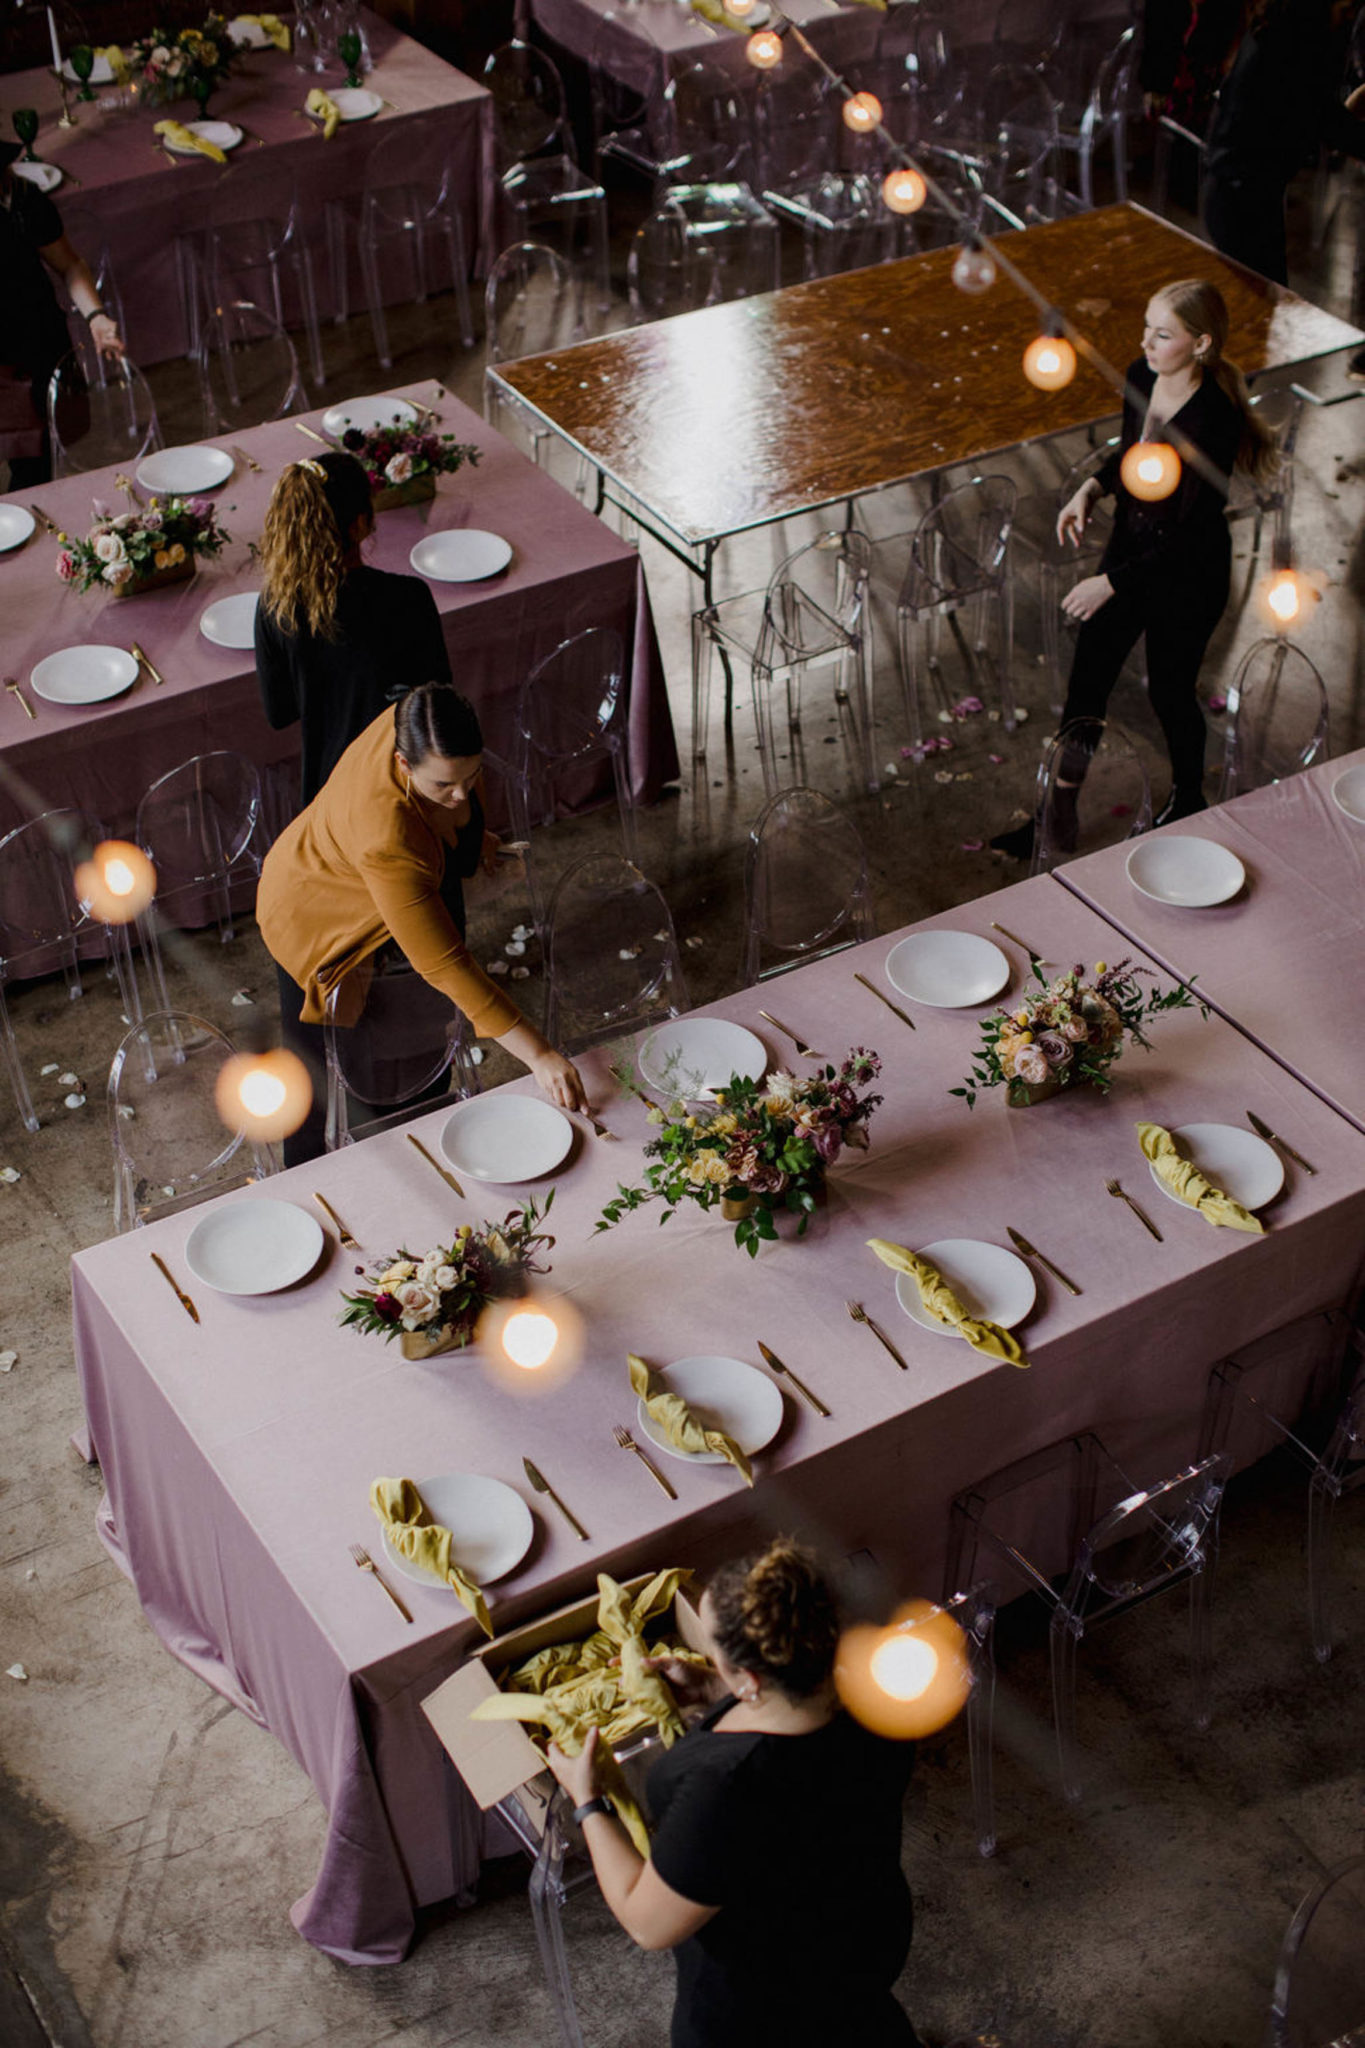 An image of wedding vendors actively setting up before the reception starts. The title on this image states "Wedding Vendor Tipping Guide". Sharing the how, who and when protocols of tipping your wedding vendor.